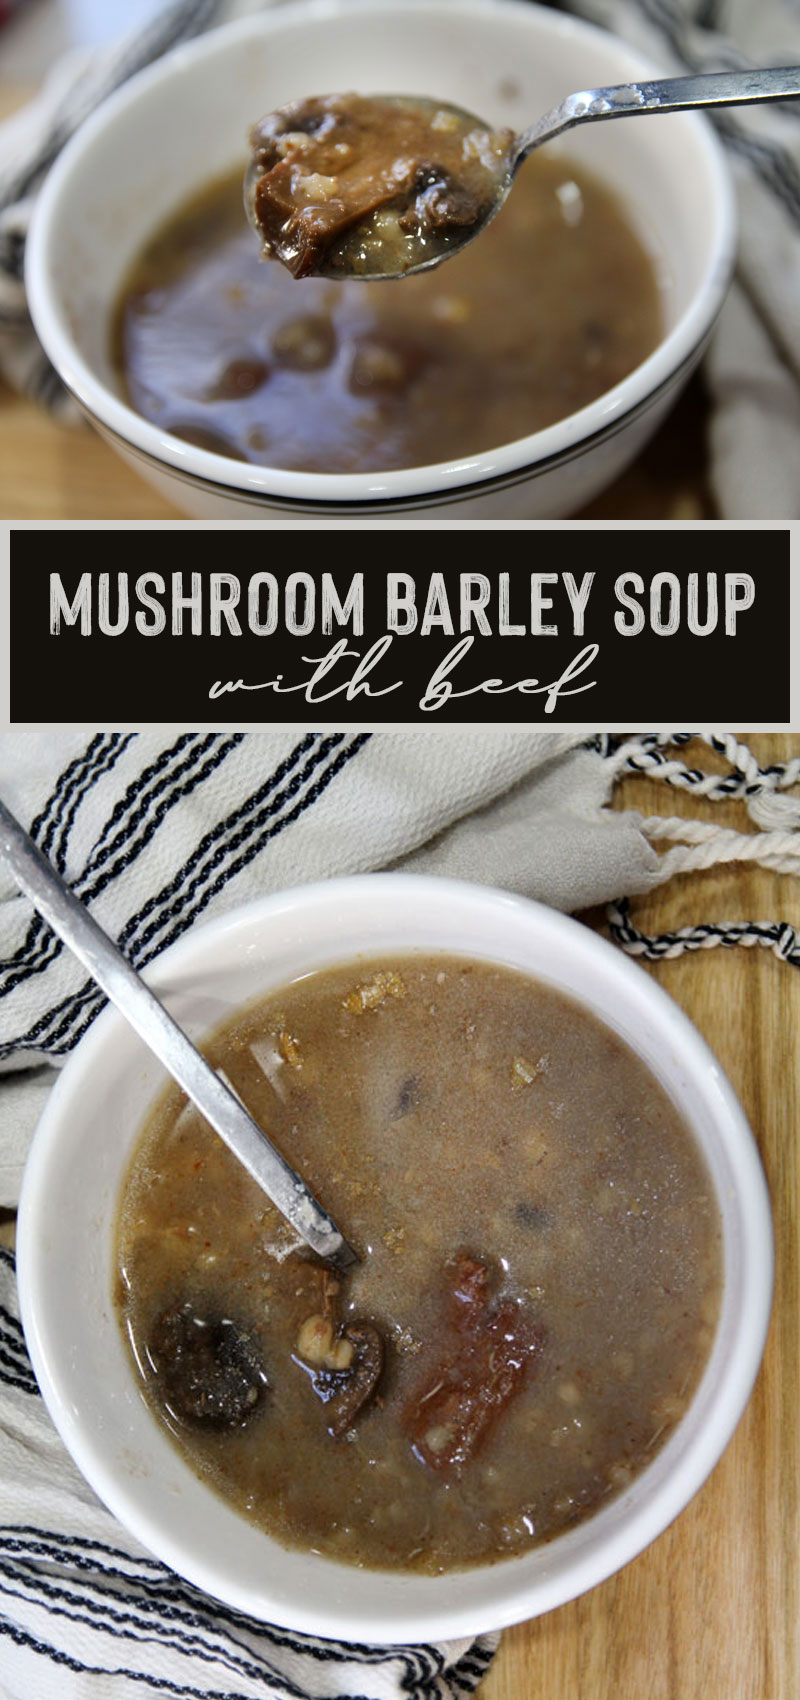 Make this delicious crock pot mushroom barley soup - a delicious Eastern European Jewish slow cooker recipe and one of my favorite ideas for Shabbat lunch.